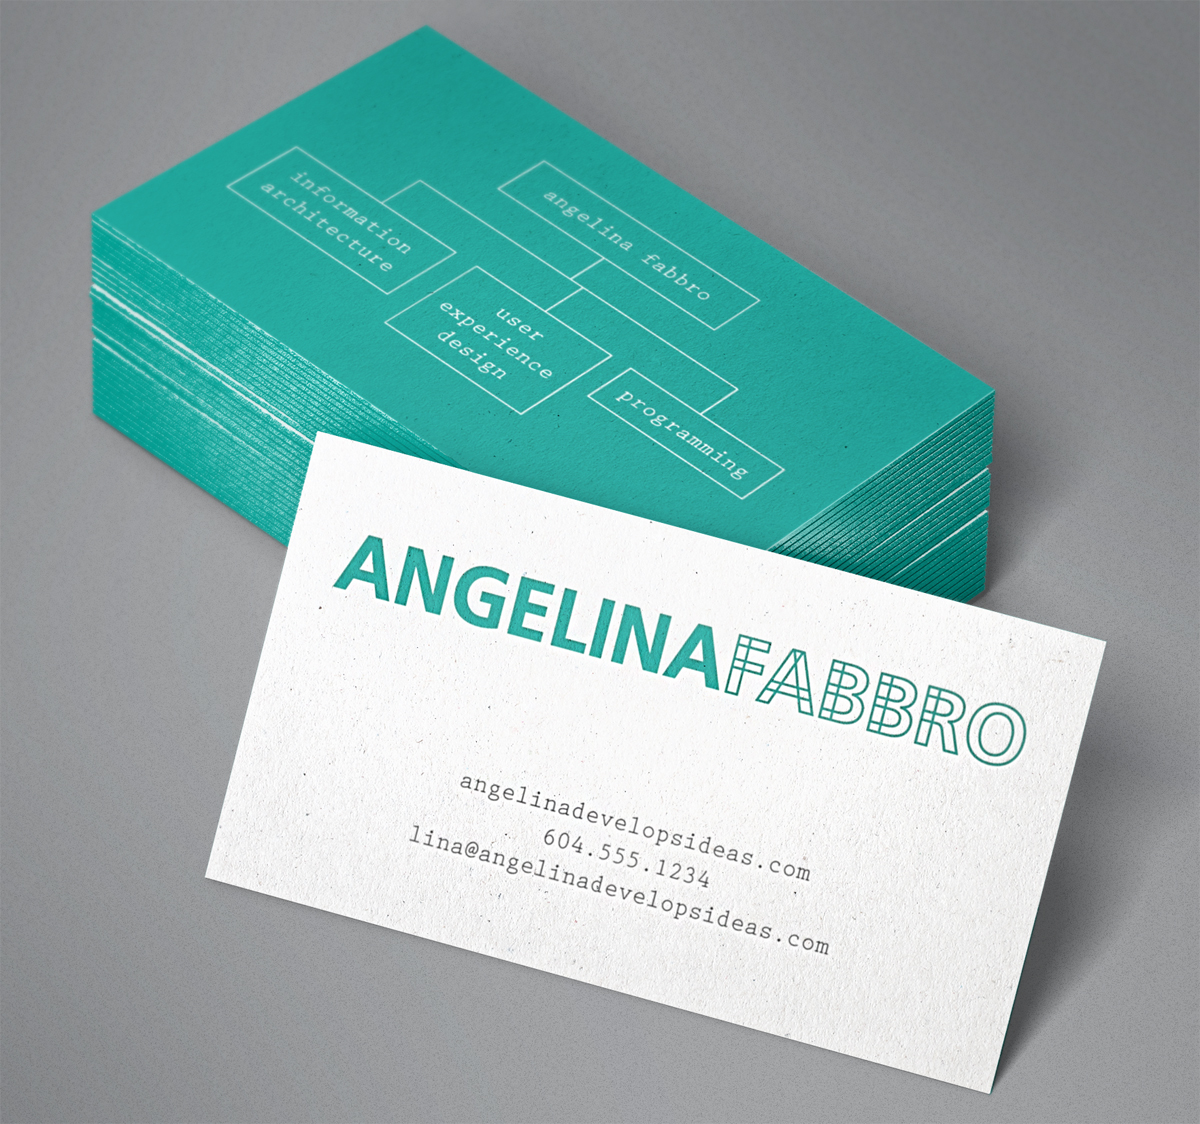 Business card design for Angelina Fabbro